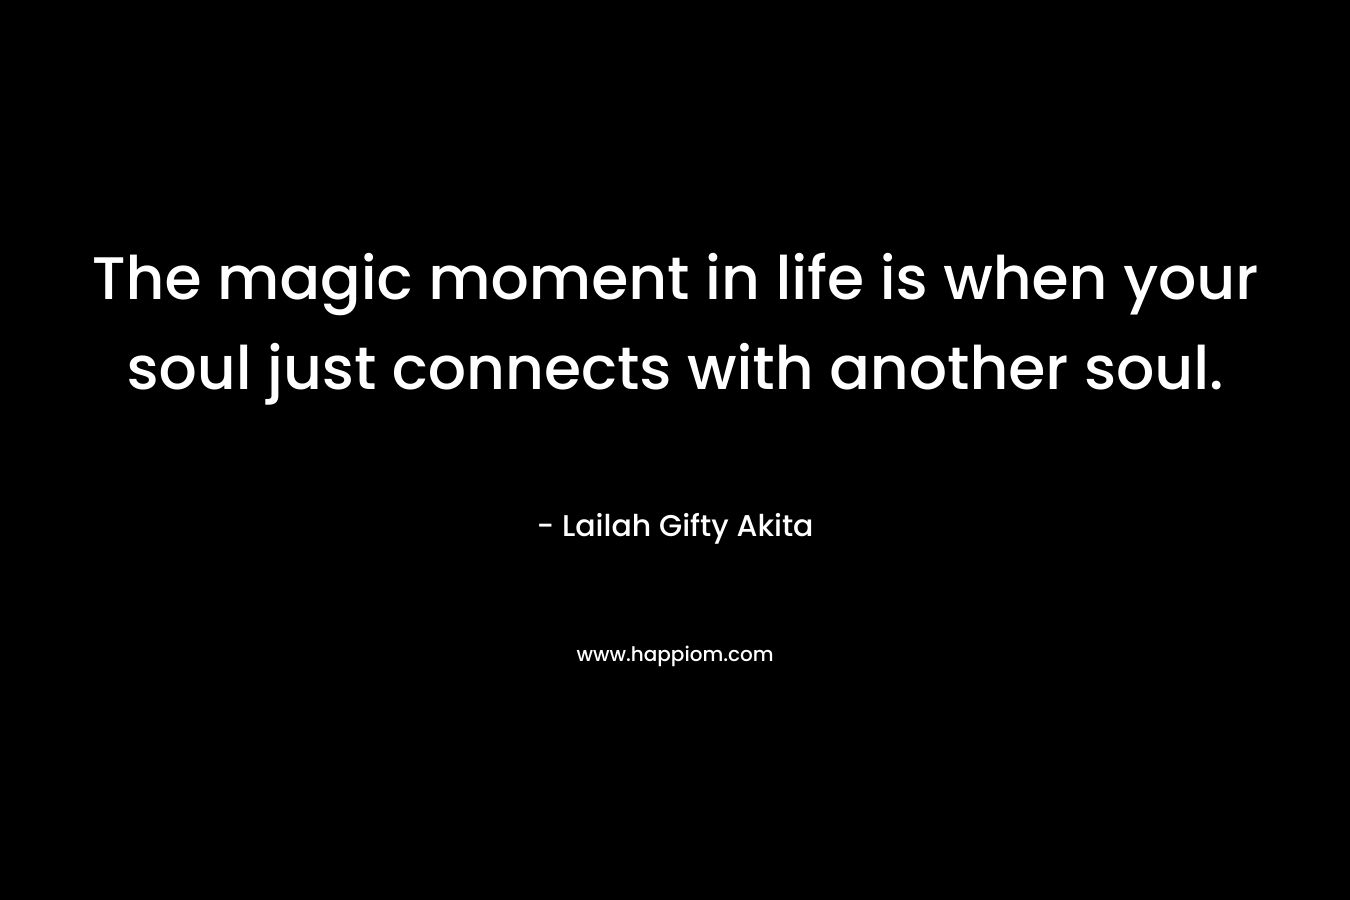 The magic moment in life is when your soul just connects with another soul. – Lailah Gifty Akita